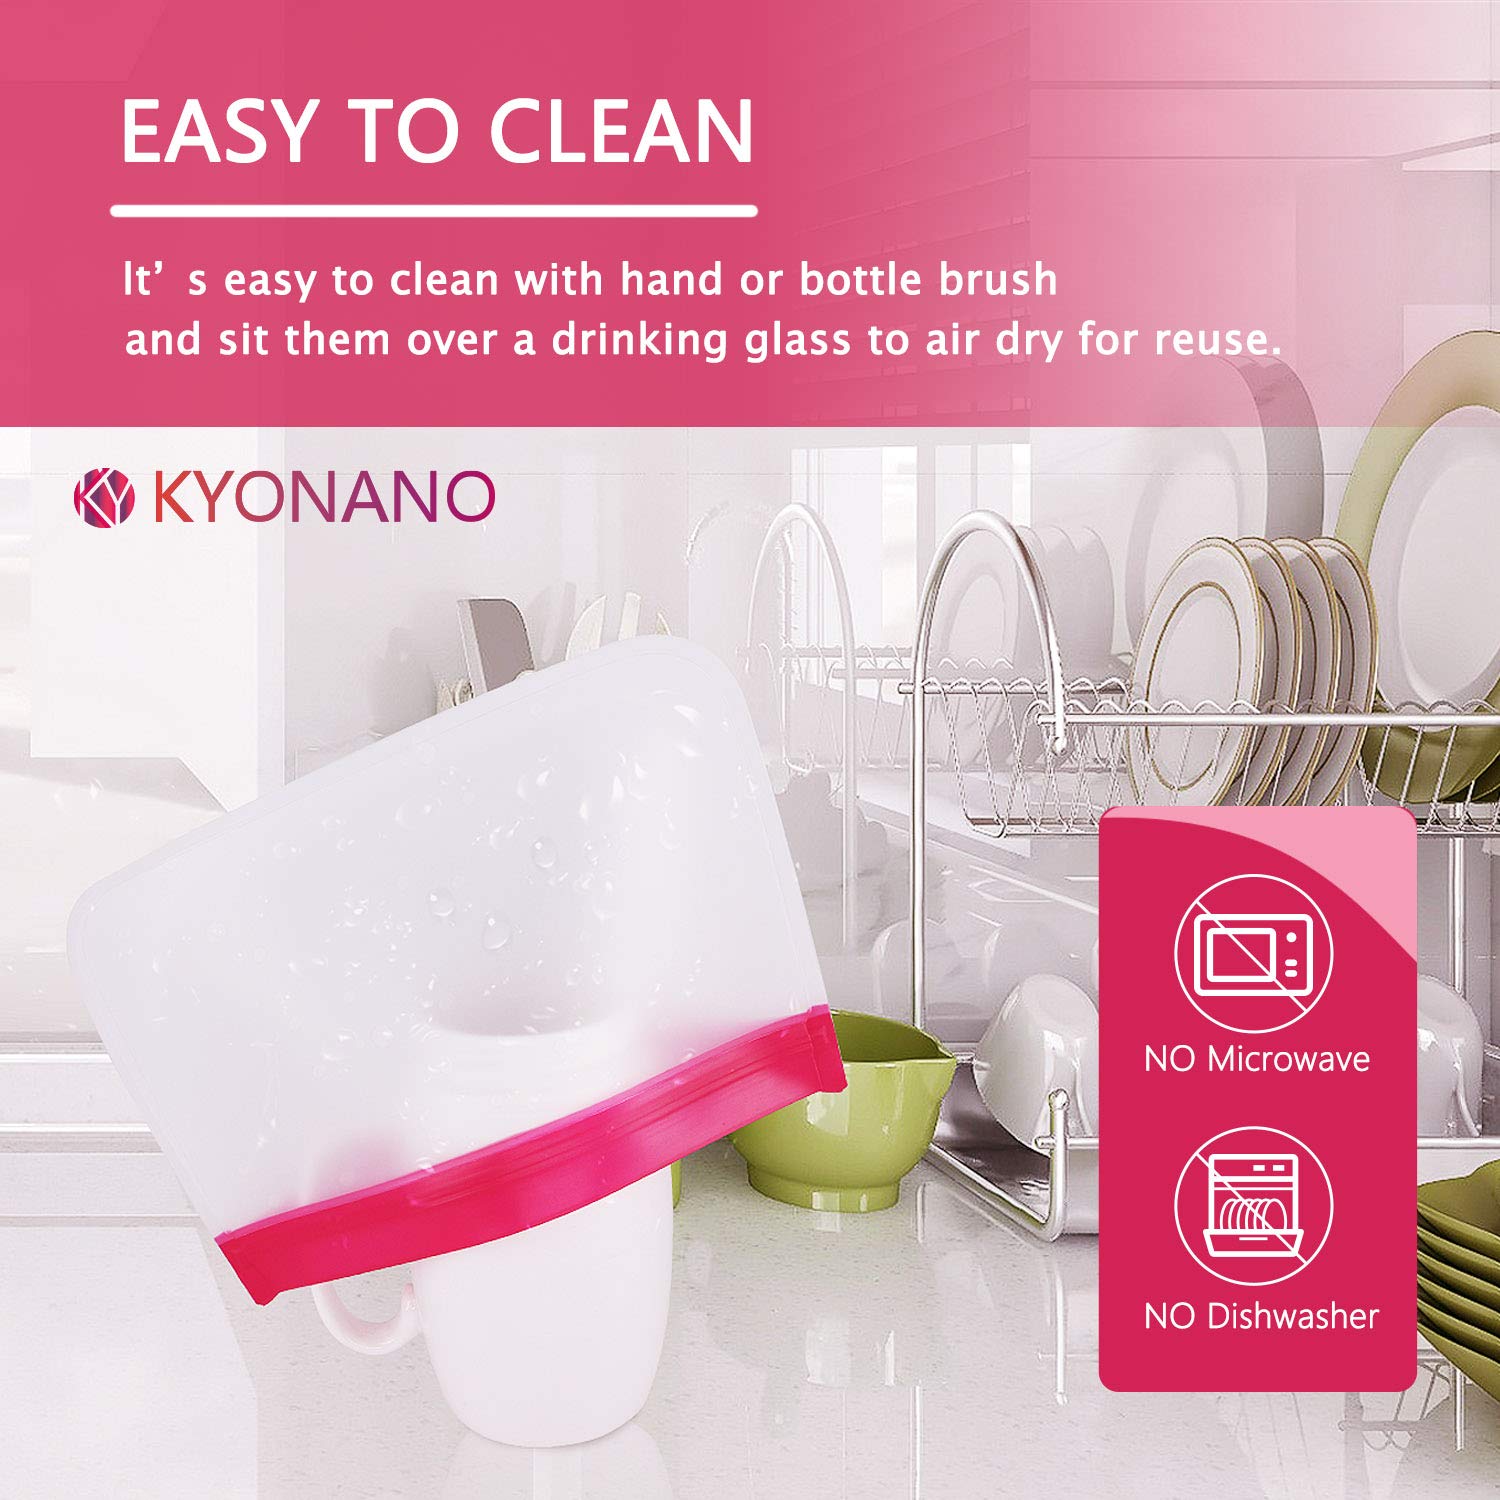 KYONANO Reusable Sandwich & Snacks Bags 10 Pack, Reusable Ziplock Storage Bags Freezer Safe, Extra Thick PEVA Material BPA/Plastic Free Bags for Lunch, Snacks, Toiletries, Make-up